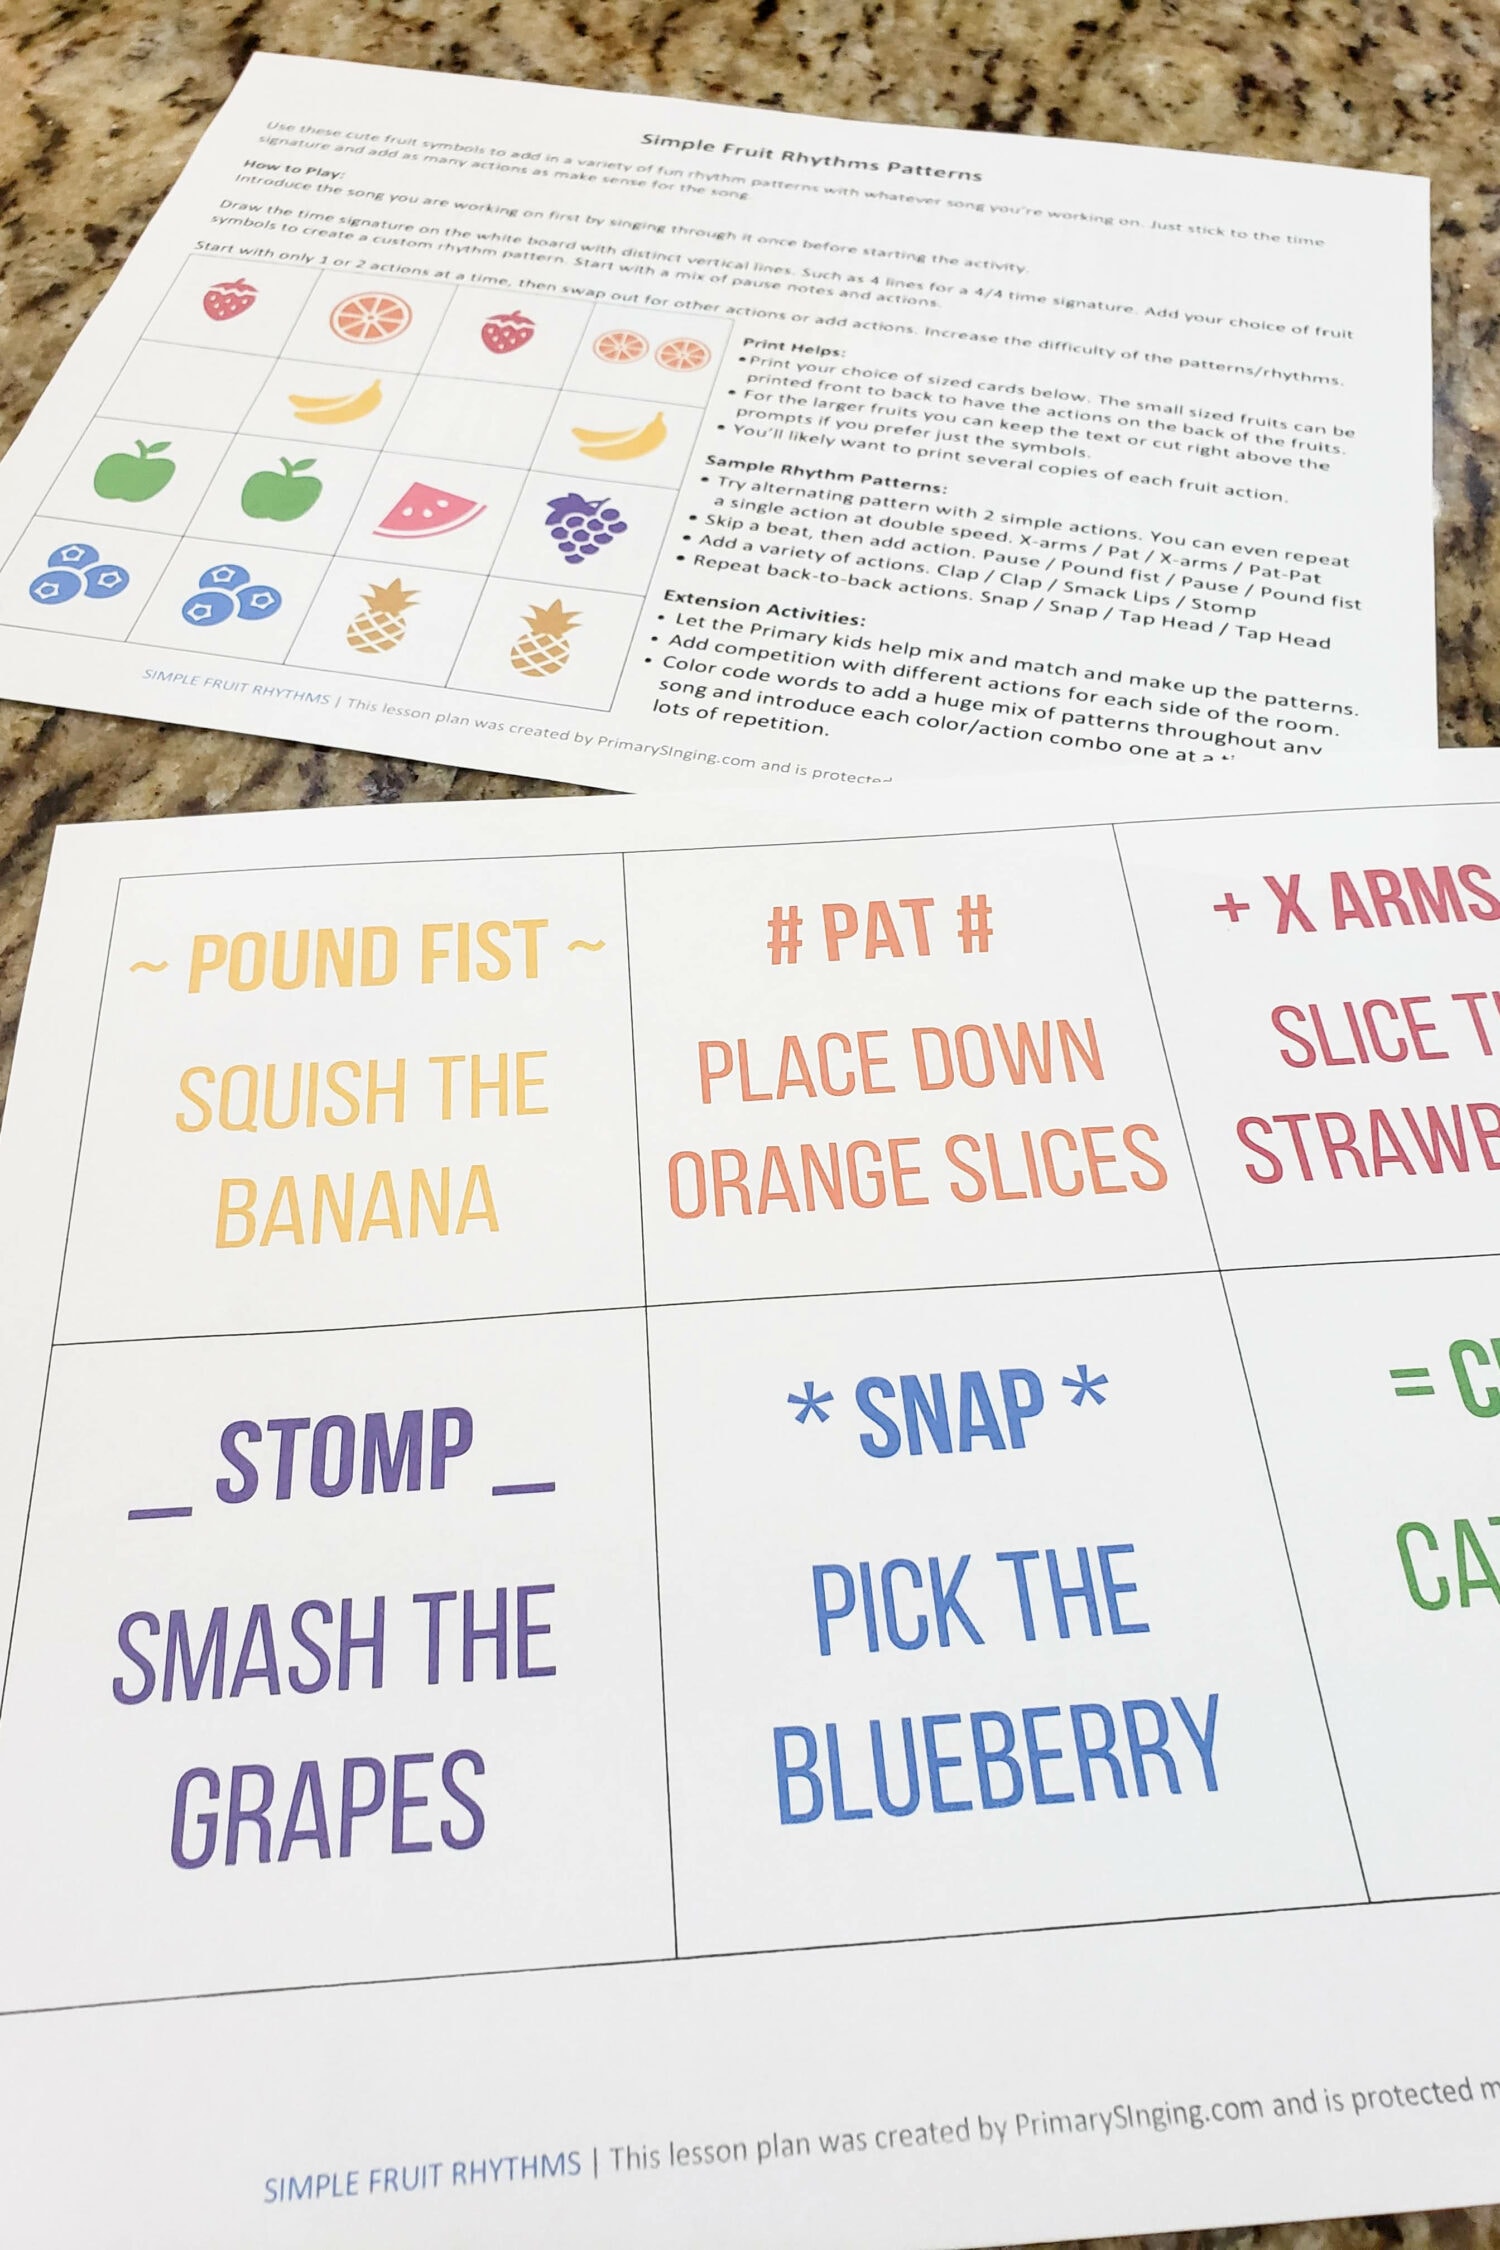 Play a fun game of Fruit Ninja in singing time with these flexible Fruit Rhythm Patterns printable cards that match with an action, color, and even a shape to use with any Primary song. Great for any music leaders. LDS Review Game.